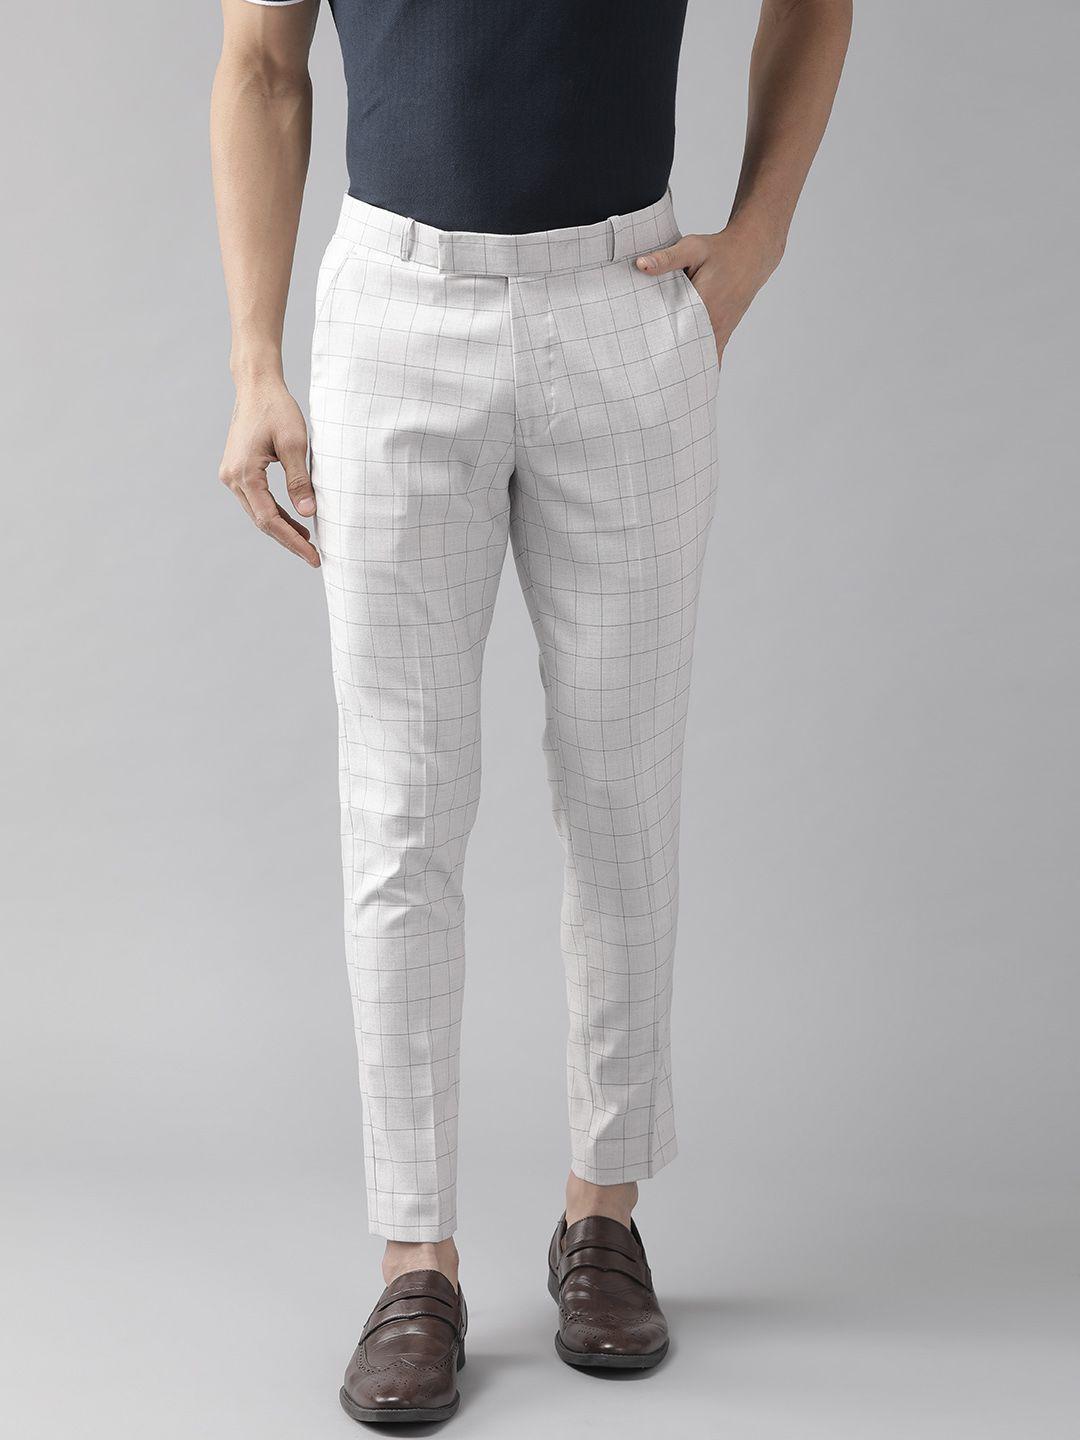 dennison men off-white & grey smart tapered fit self-checked regular trousers